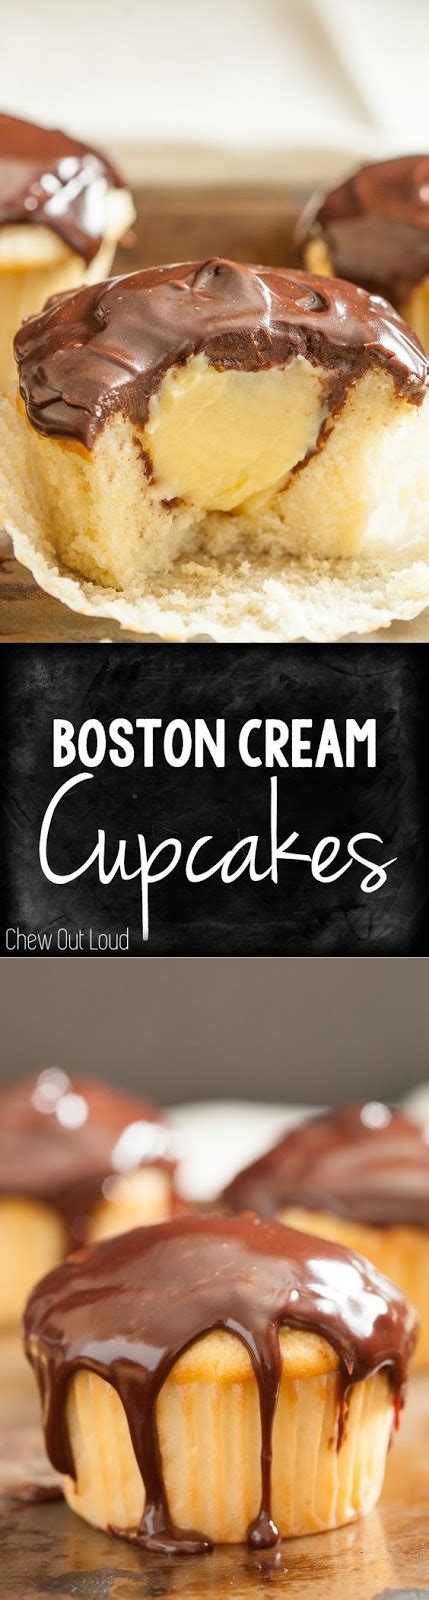 Prepare cake mix according to package directions. The best Pinterest Food and Dessert Recipes: Boston Cream ...